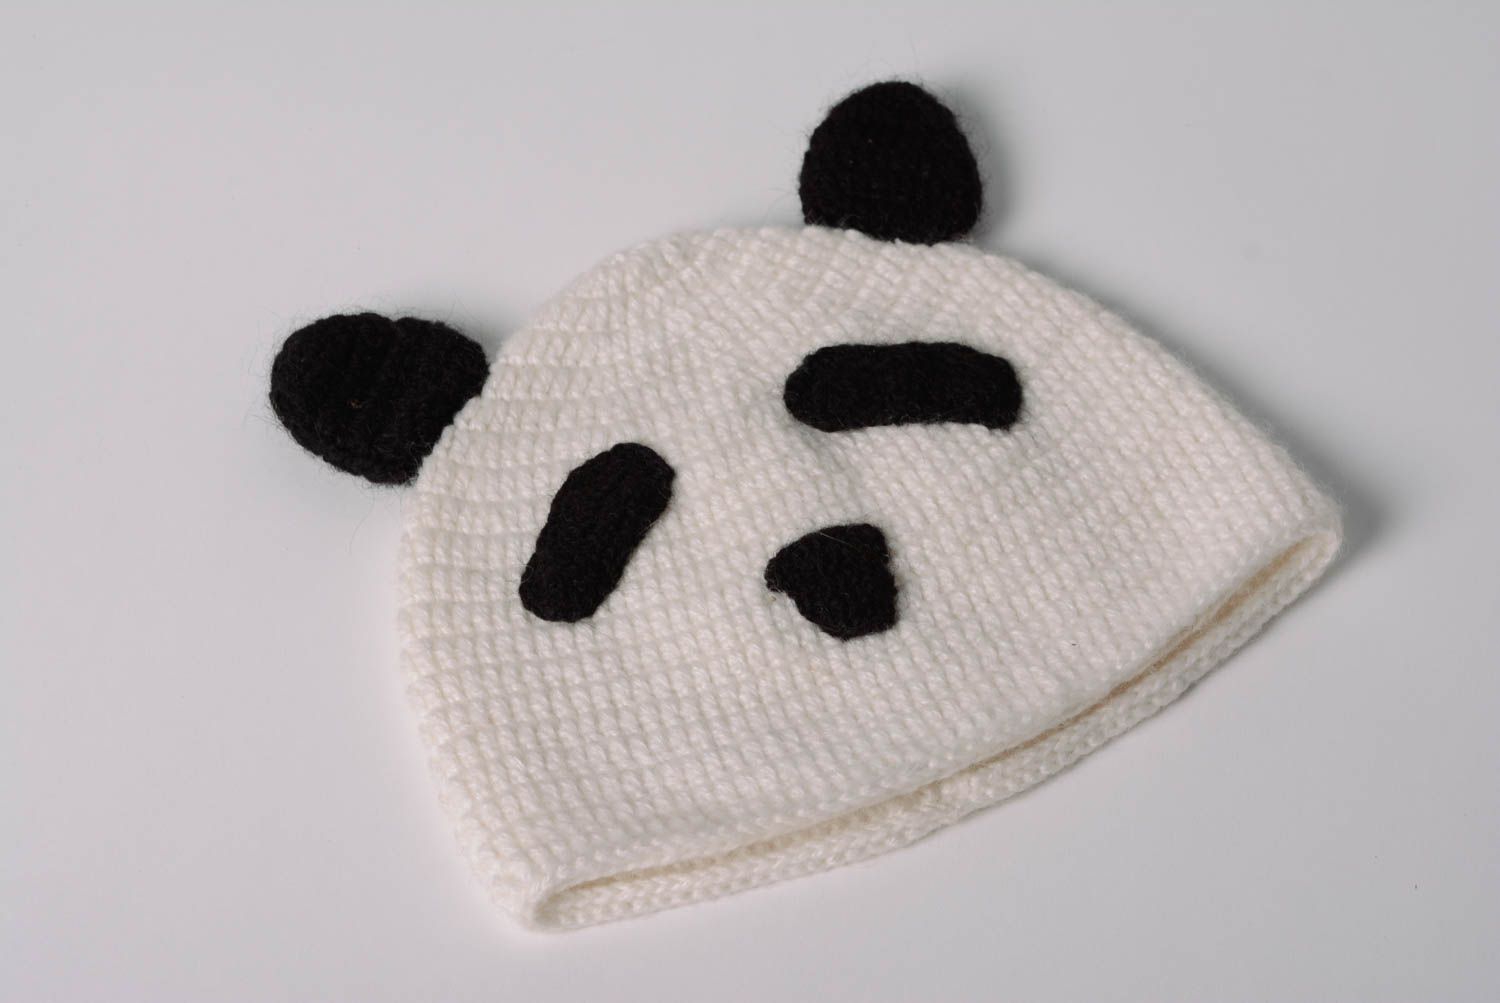 Handmade funny animal hat knitted of woolen threads Panda for women and kids photo 2